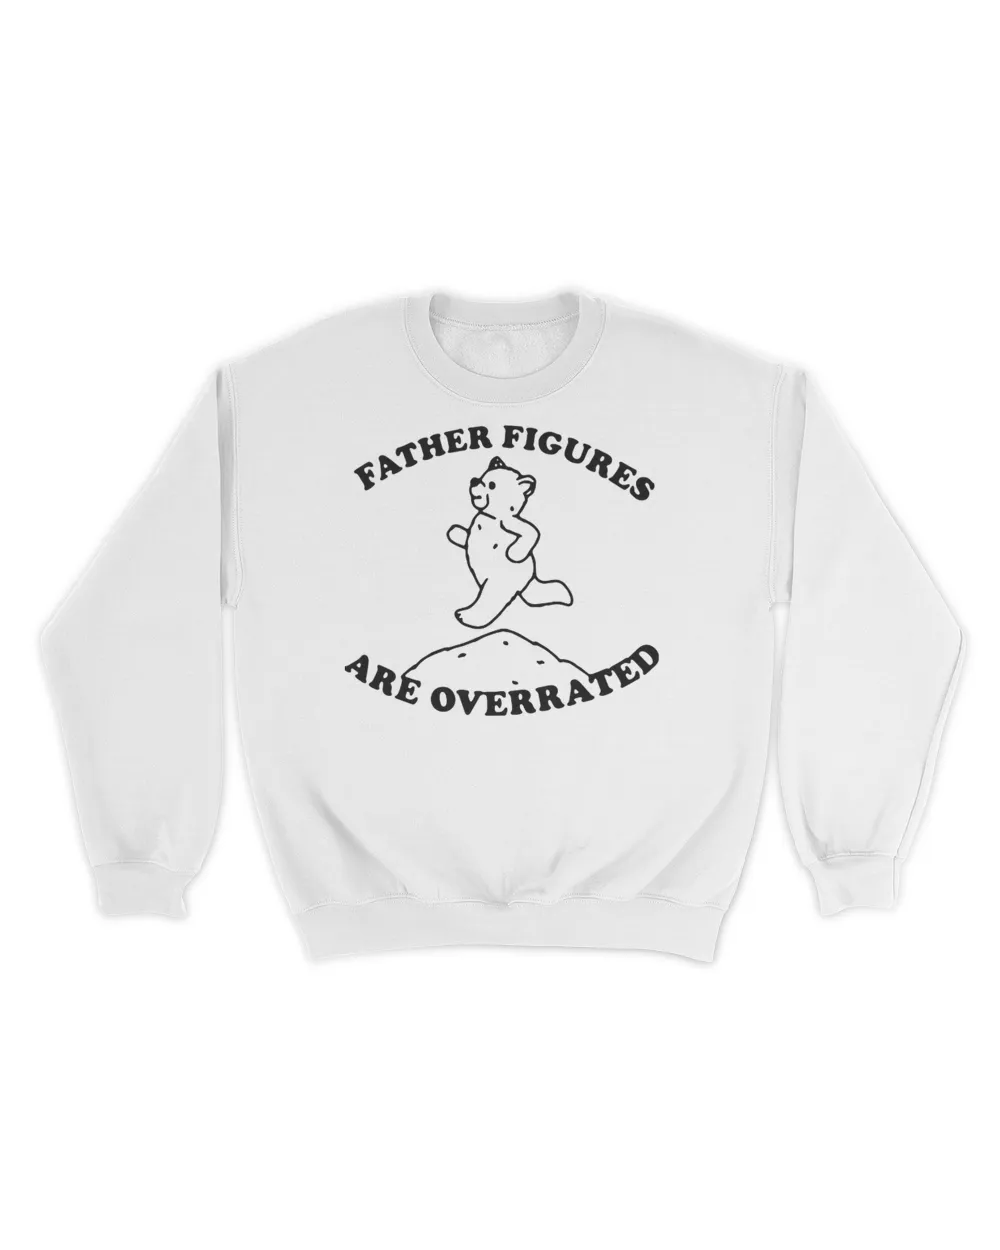 Father Figures Are Overrated Shirt Unisex Sweatshirt white 